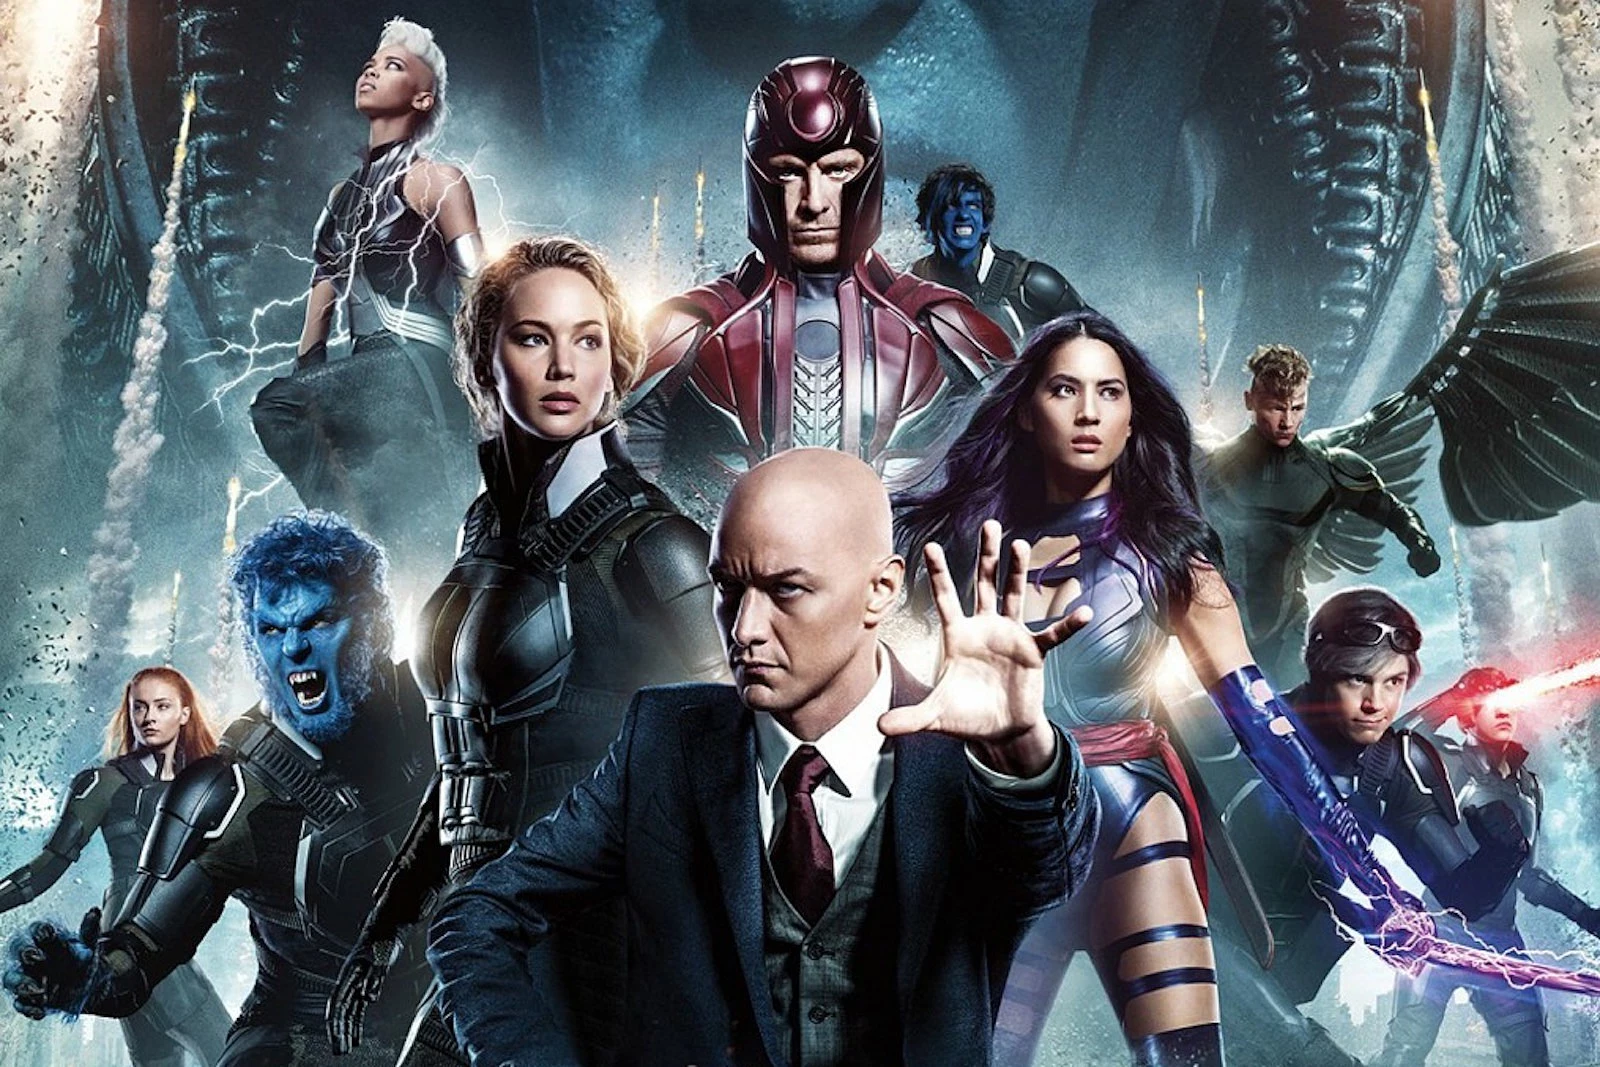 Is The Marvels' Post-Credits Scene Teasing An X-Men Takeover Of The MCU?